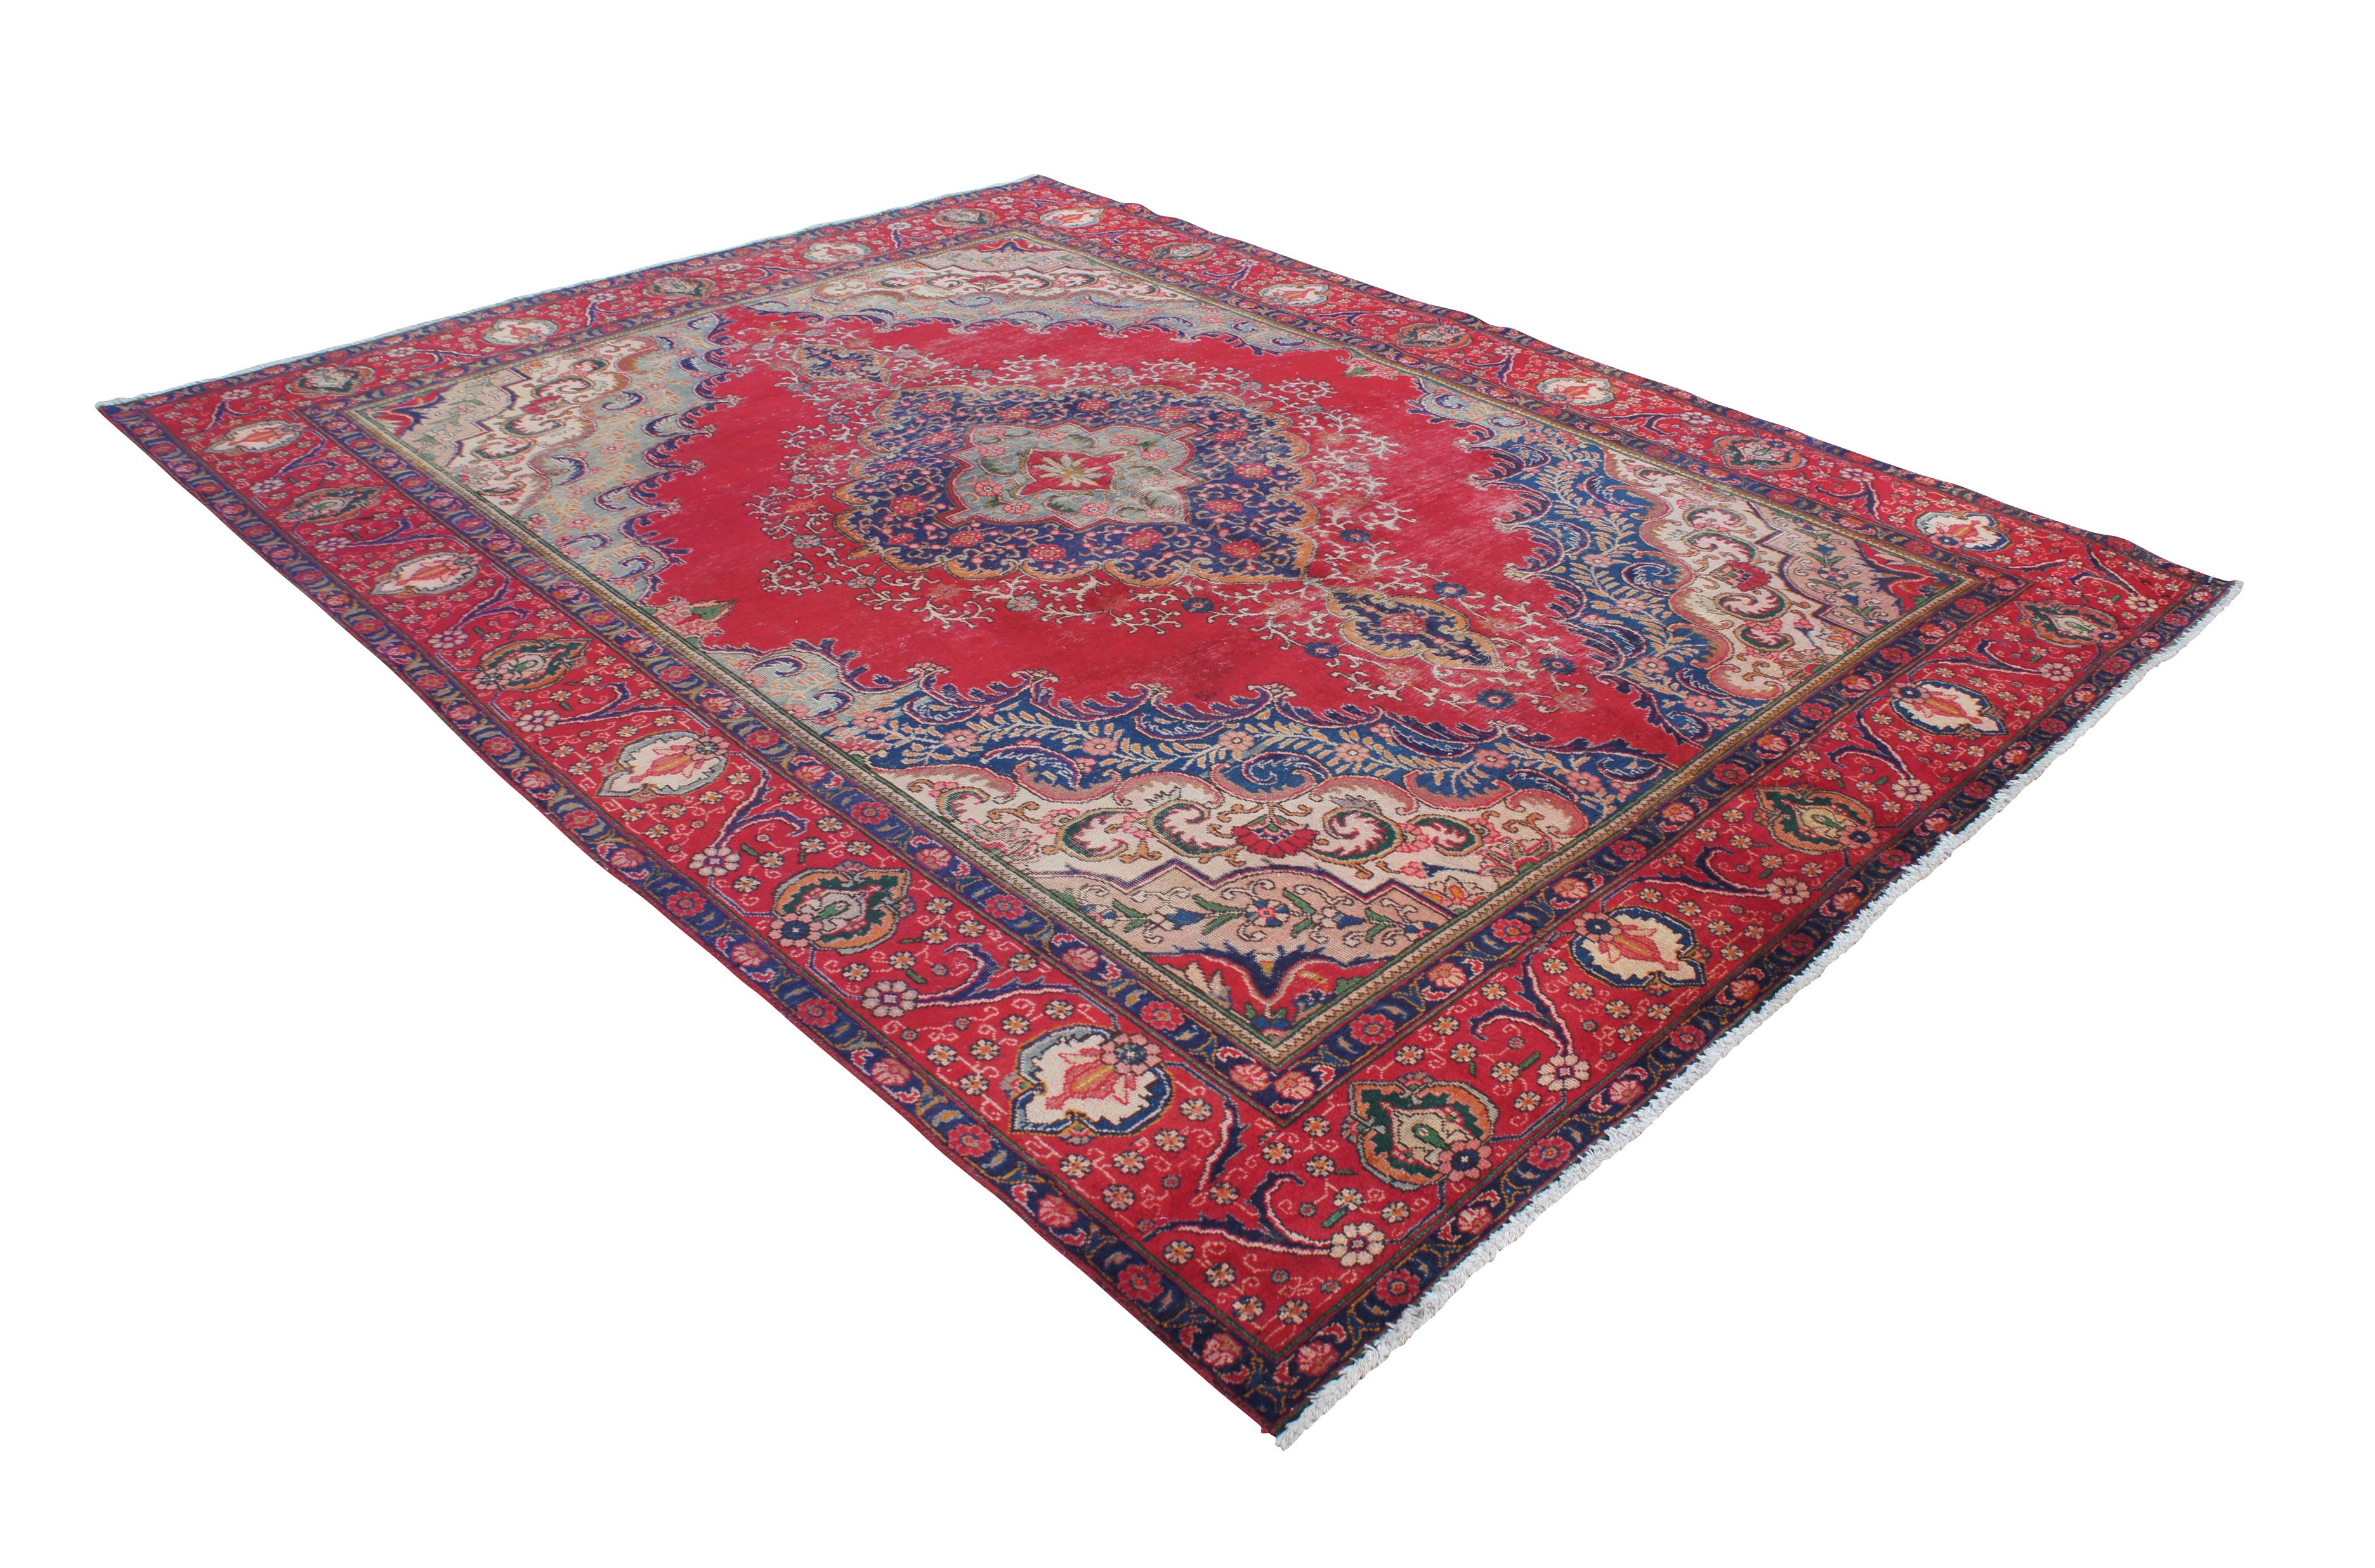 Hand Knotted Persian Tabriz Red & Blue Floral Medallion Wool Area Rug 9' x 12' In Good Condition For Sale In Dayton, OH